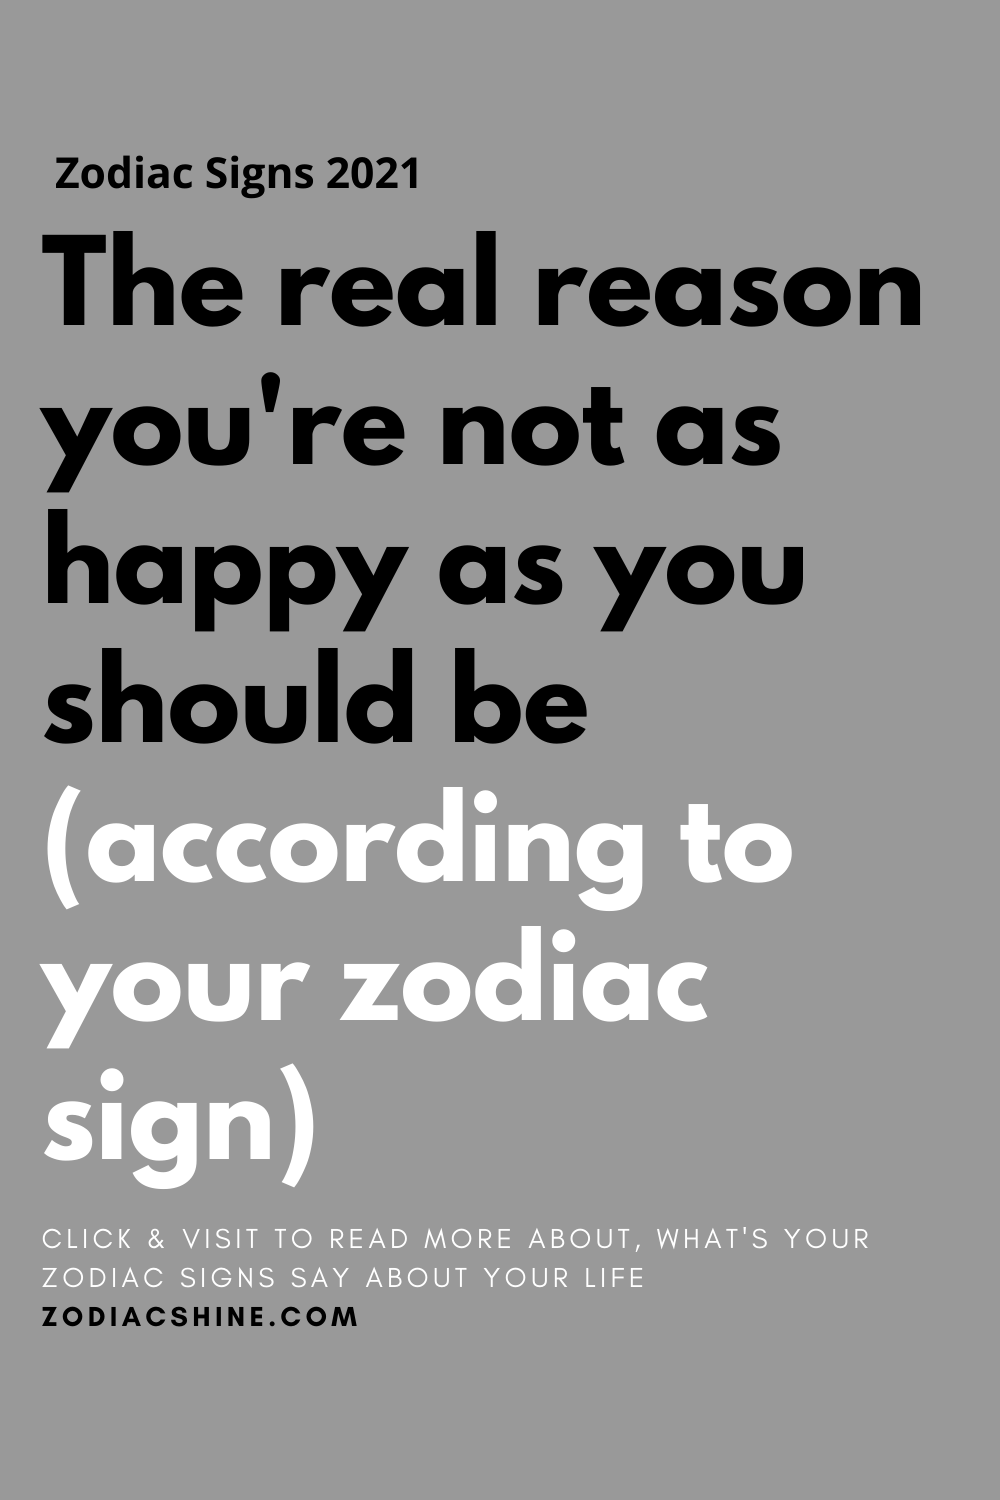 The real reason you're not as happy as you should be according to your zodiac sign